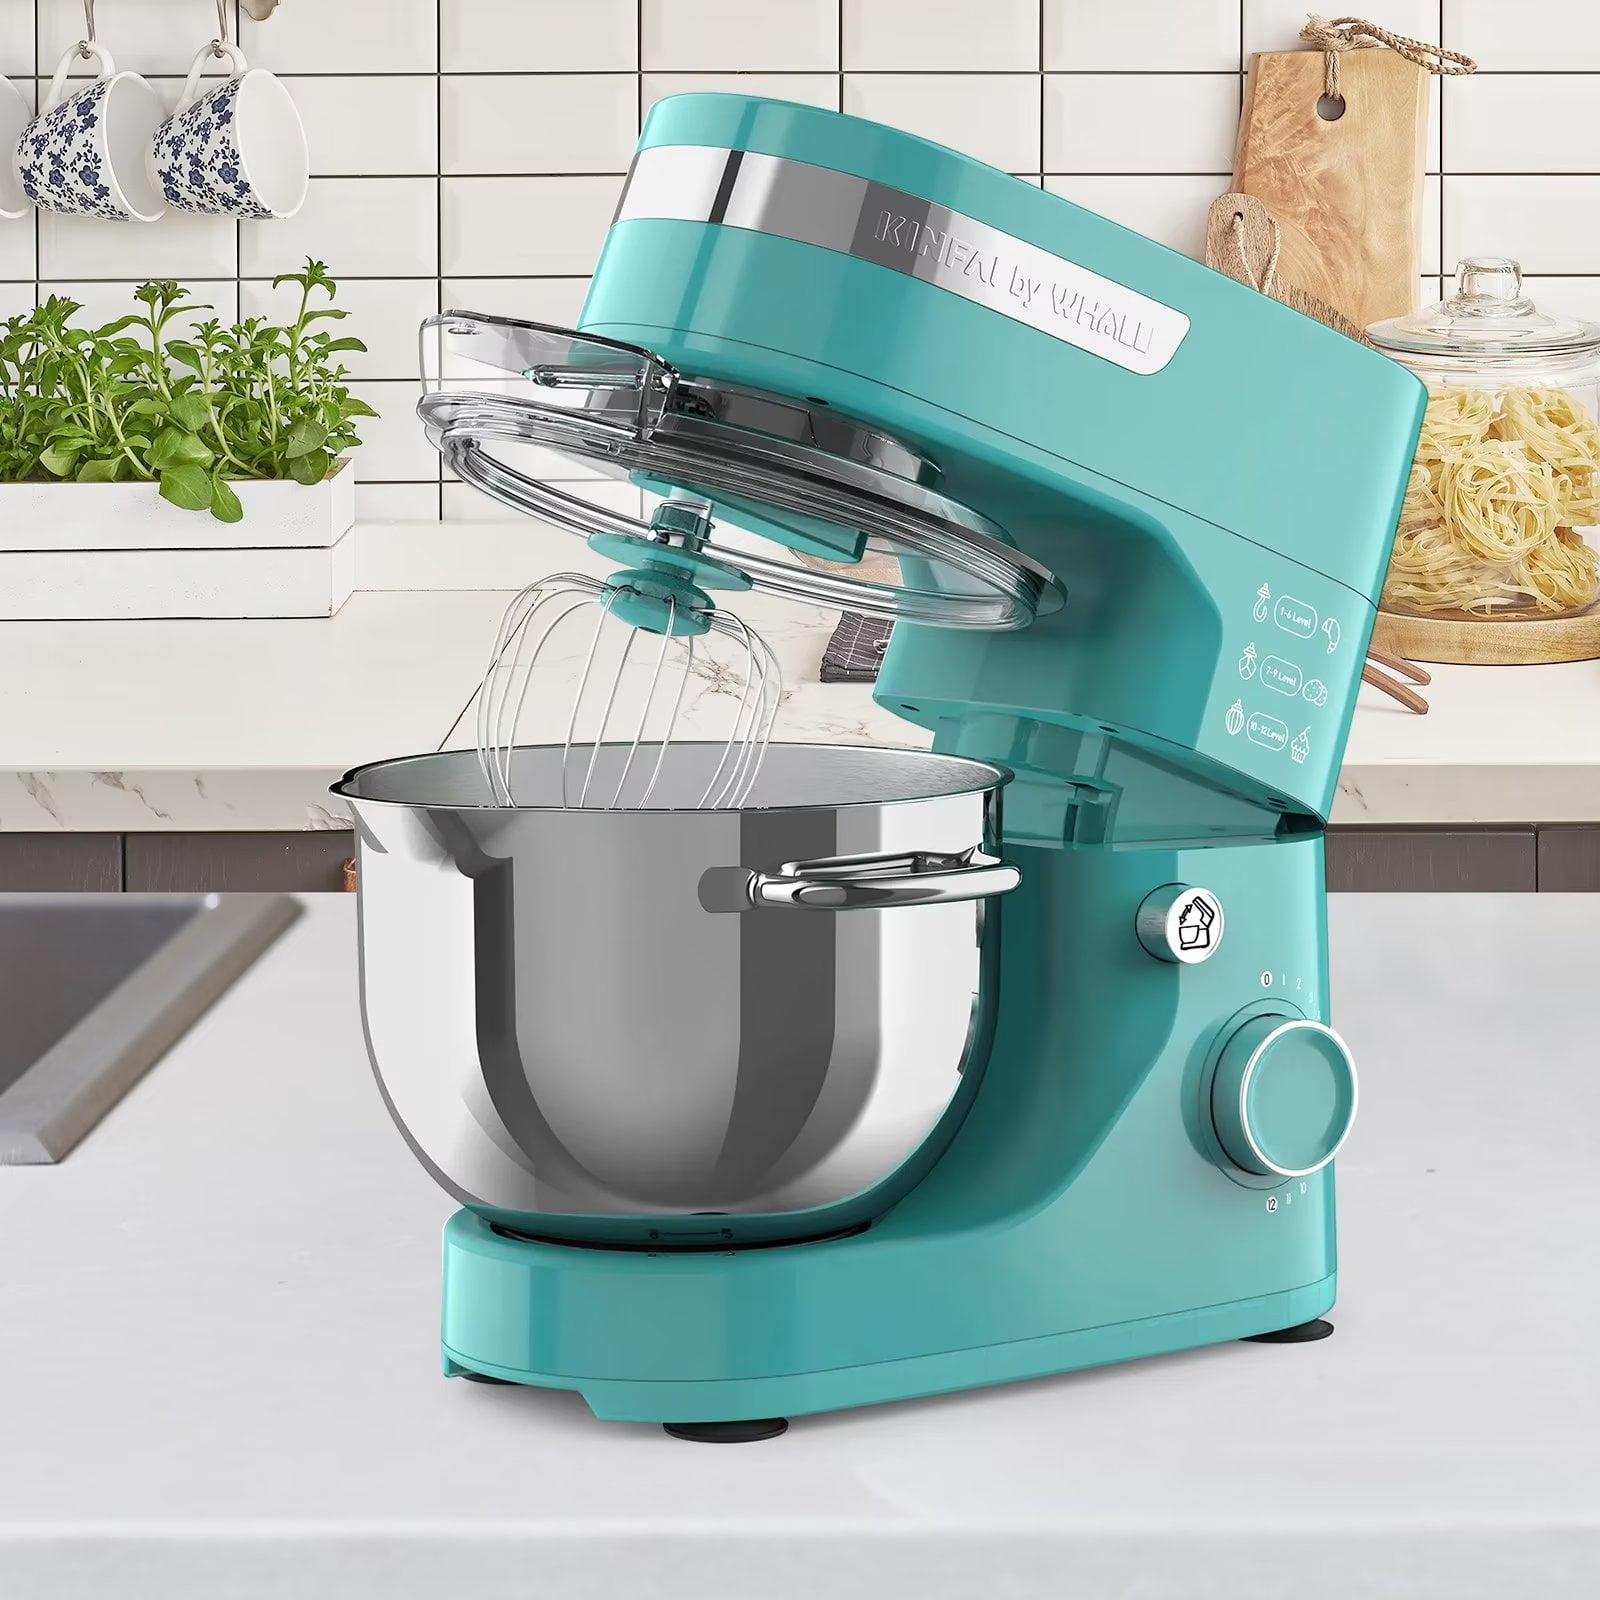 Whall Kinfai Electric Kitchen Stand Mixer Machine with 5.5 Quart Bowl for  Cake and Bread Making